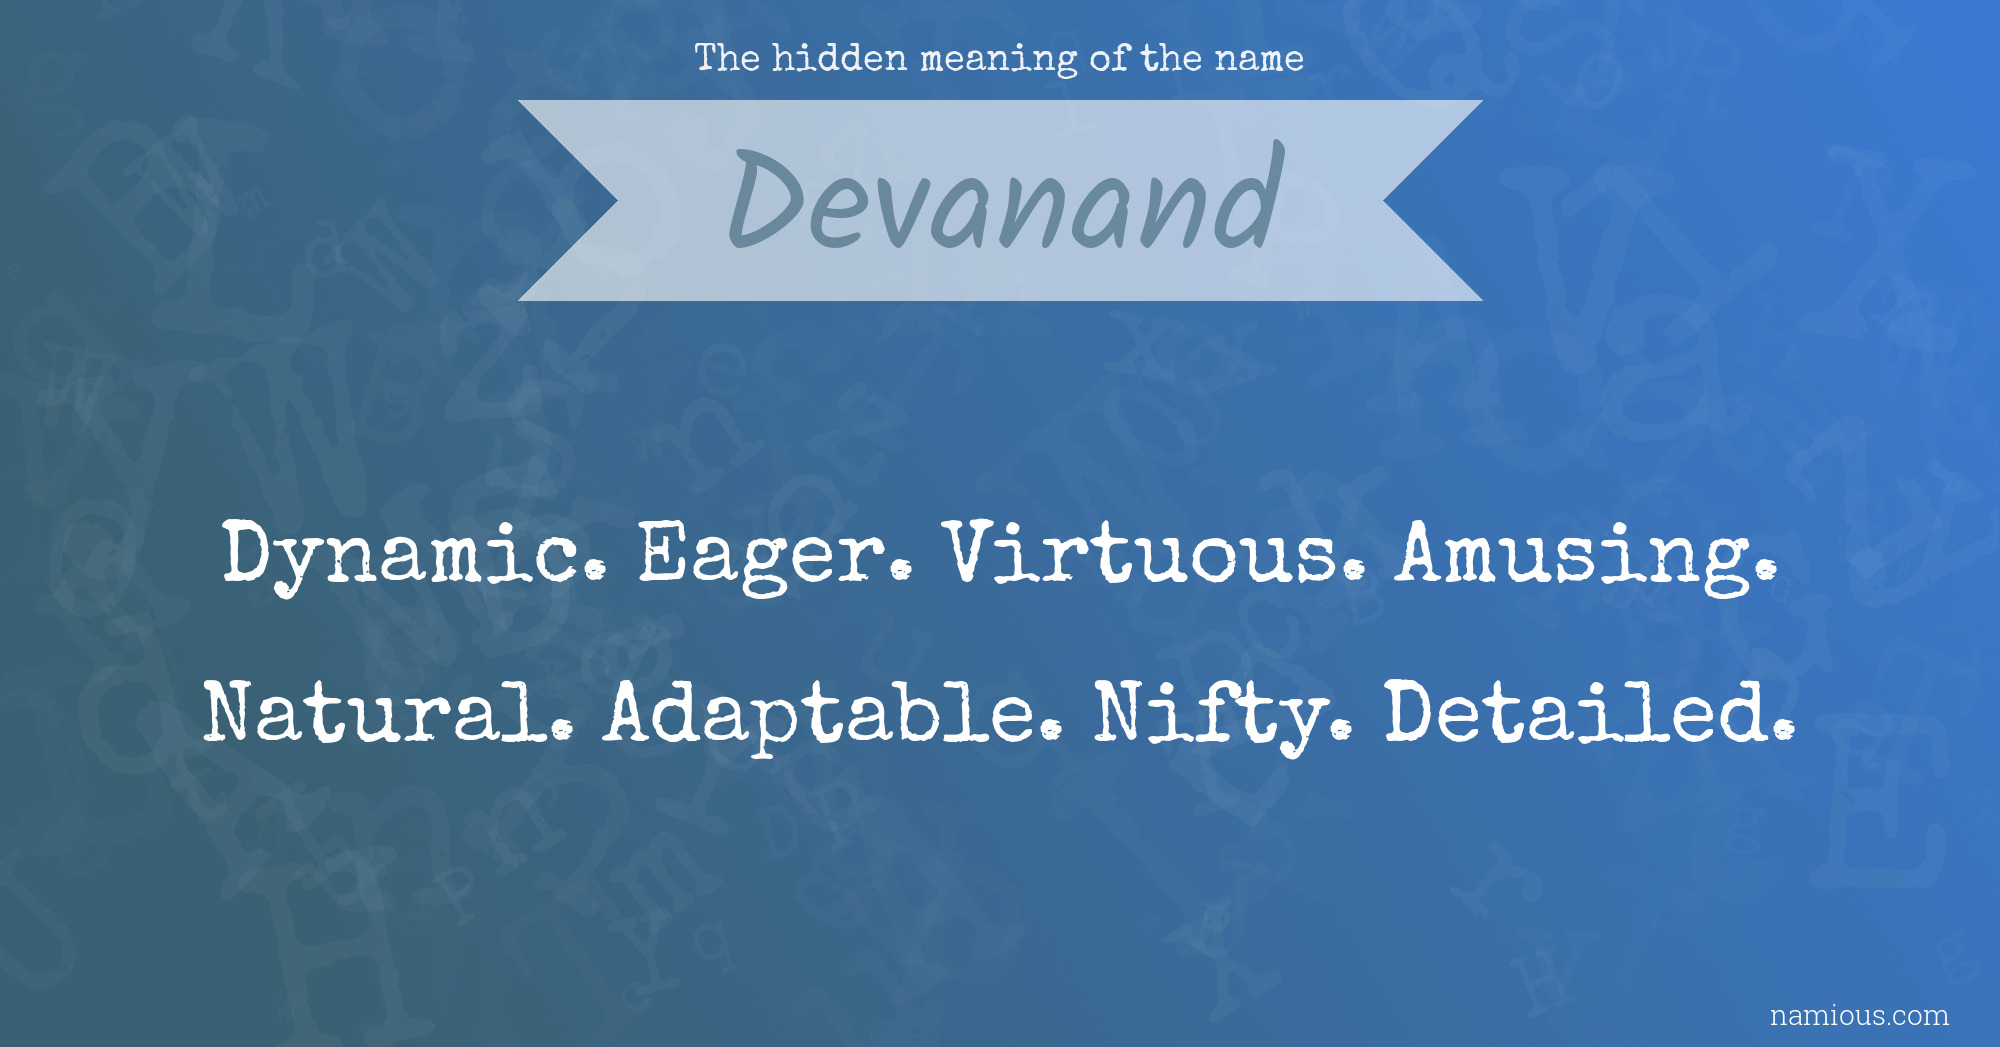 The hidden meaning of the name Devanand